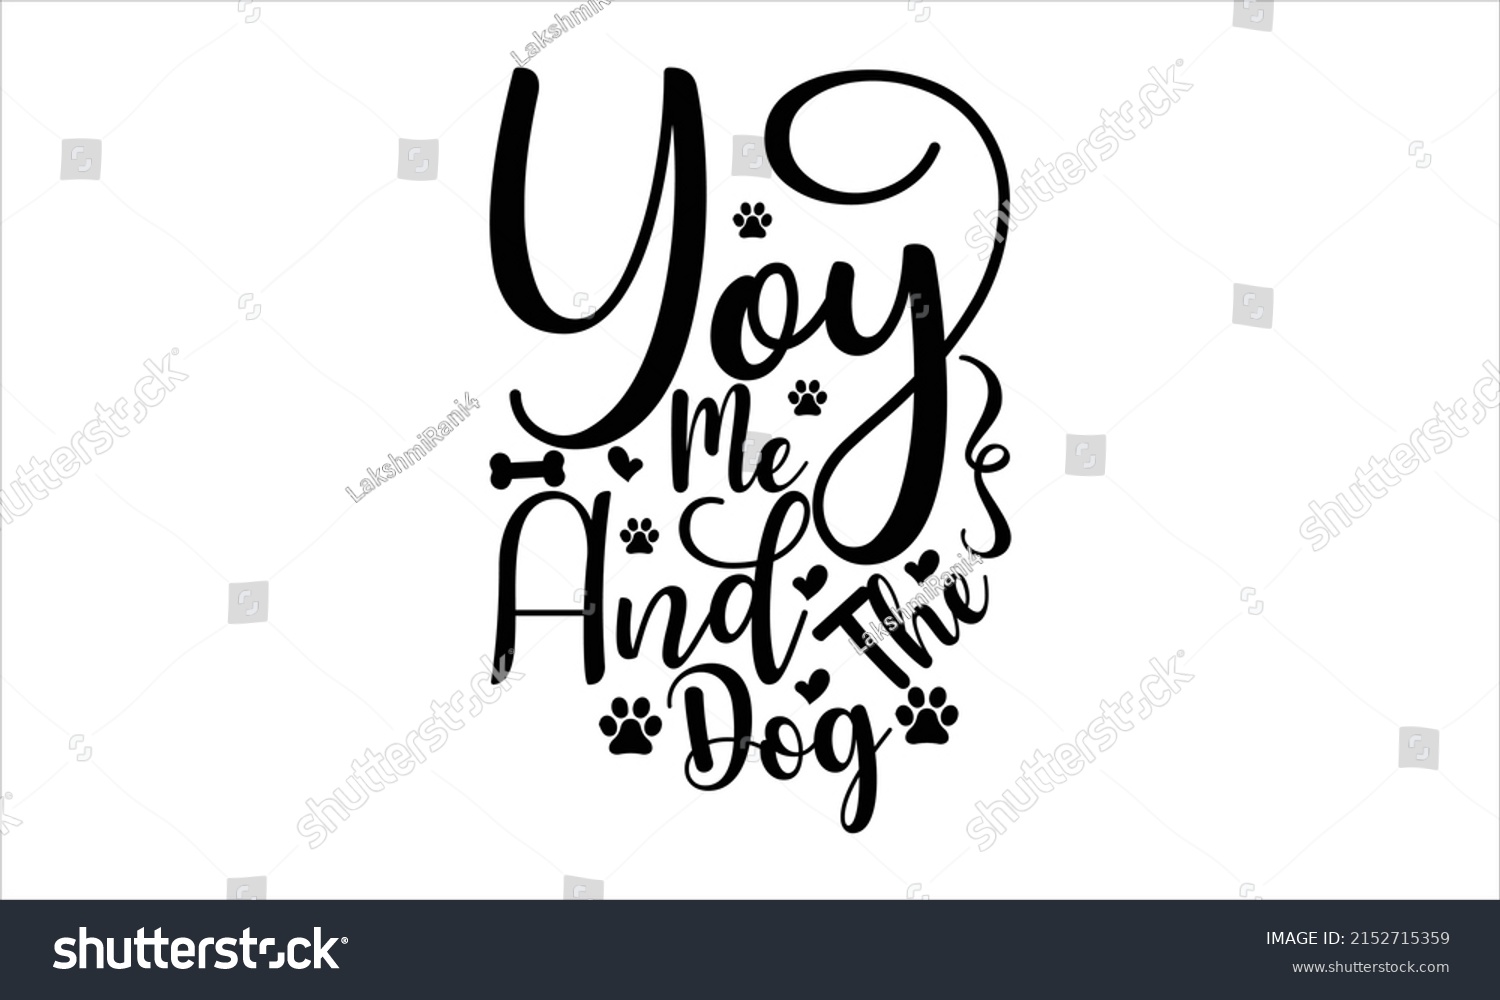 SVG of You me and the dog  -   Lettering design for greeting banners, Mouse Pads, Prints, Cards and Posters, Mugs, Notebooks, Floor Pillows and T-shirt prints design.
 svg